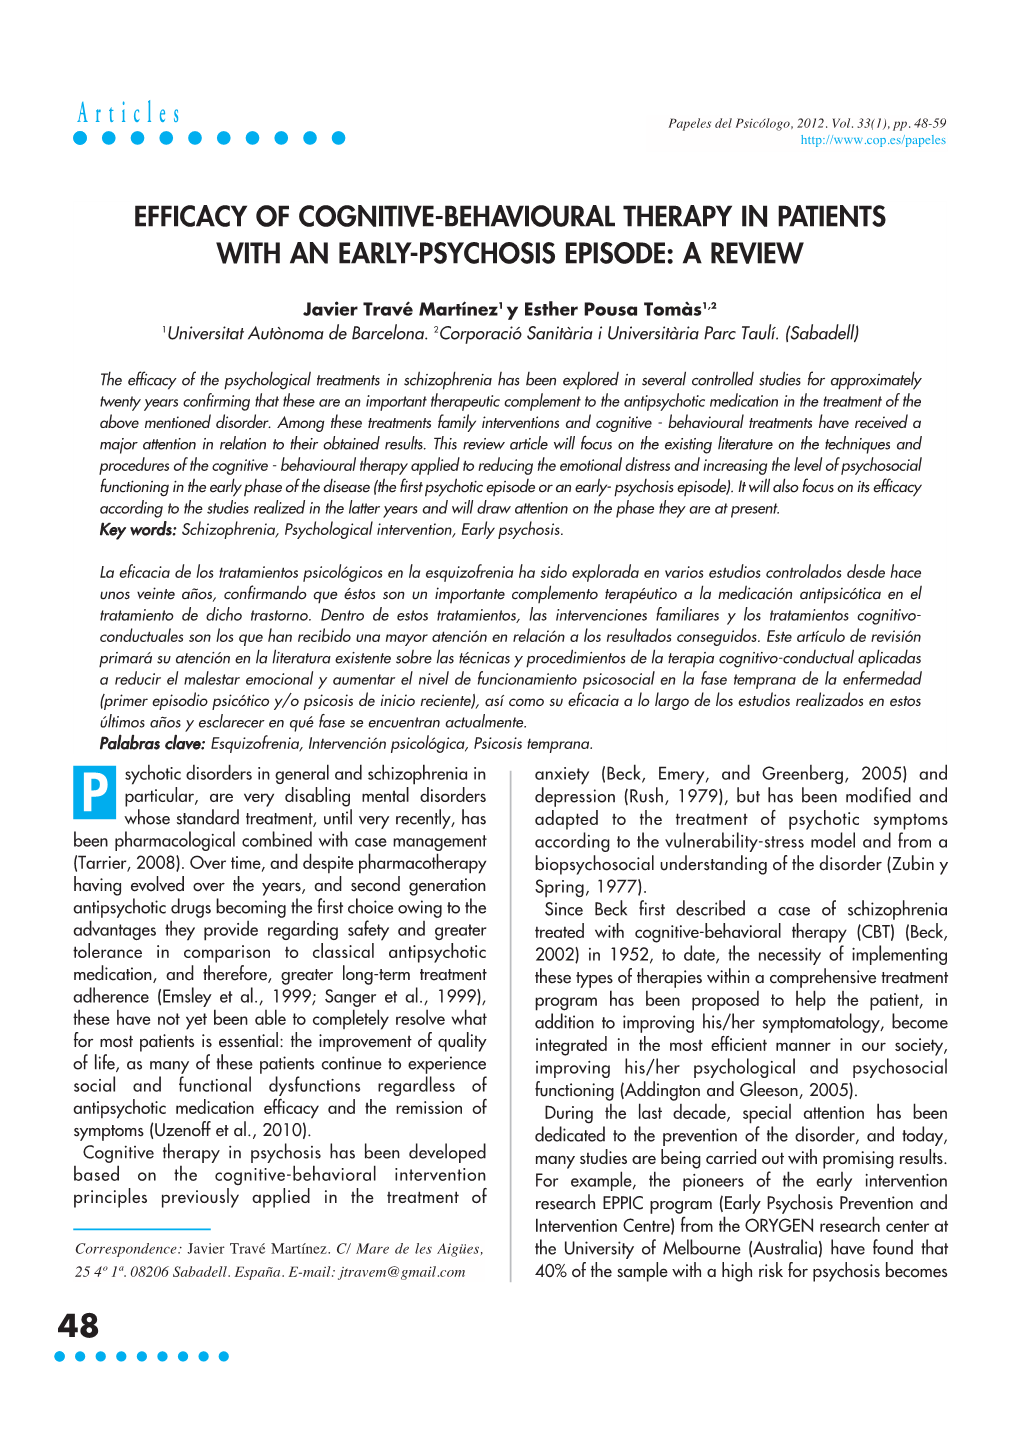 Efficacy of Cognitive-Behavioural Therapy in Patients with an Early-Psychosis Episode: a Review